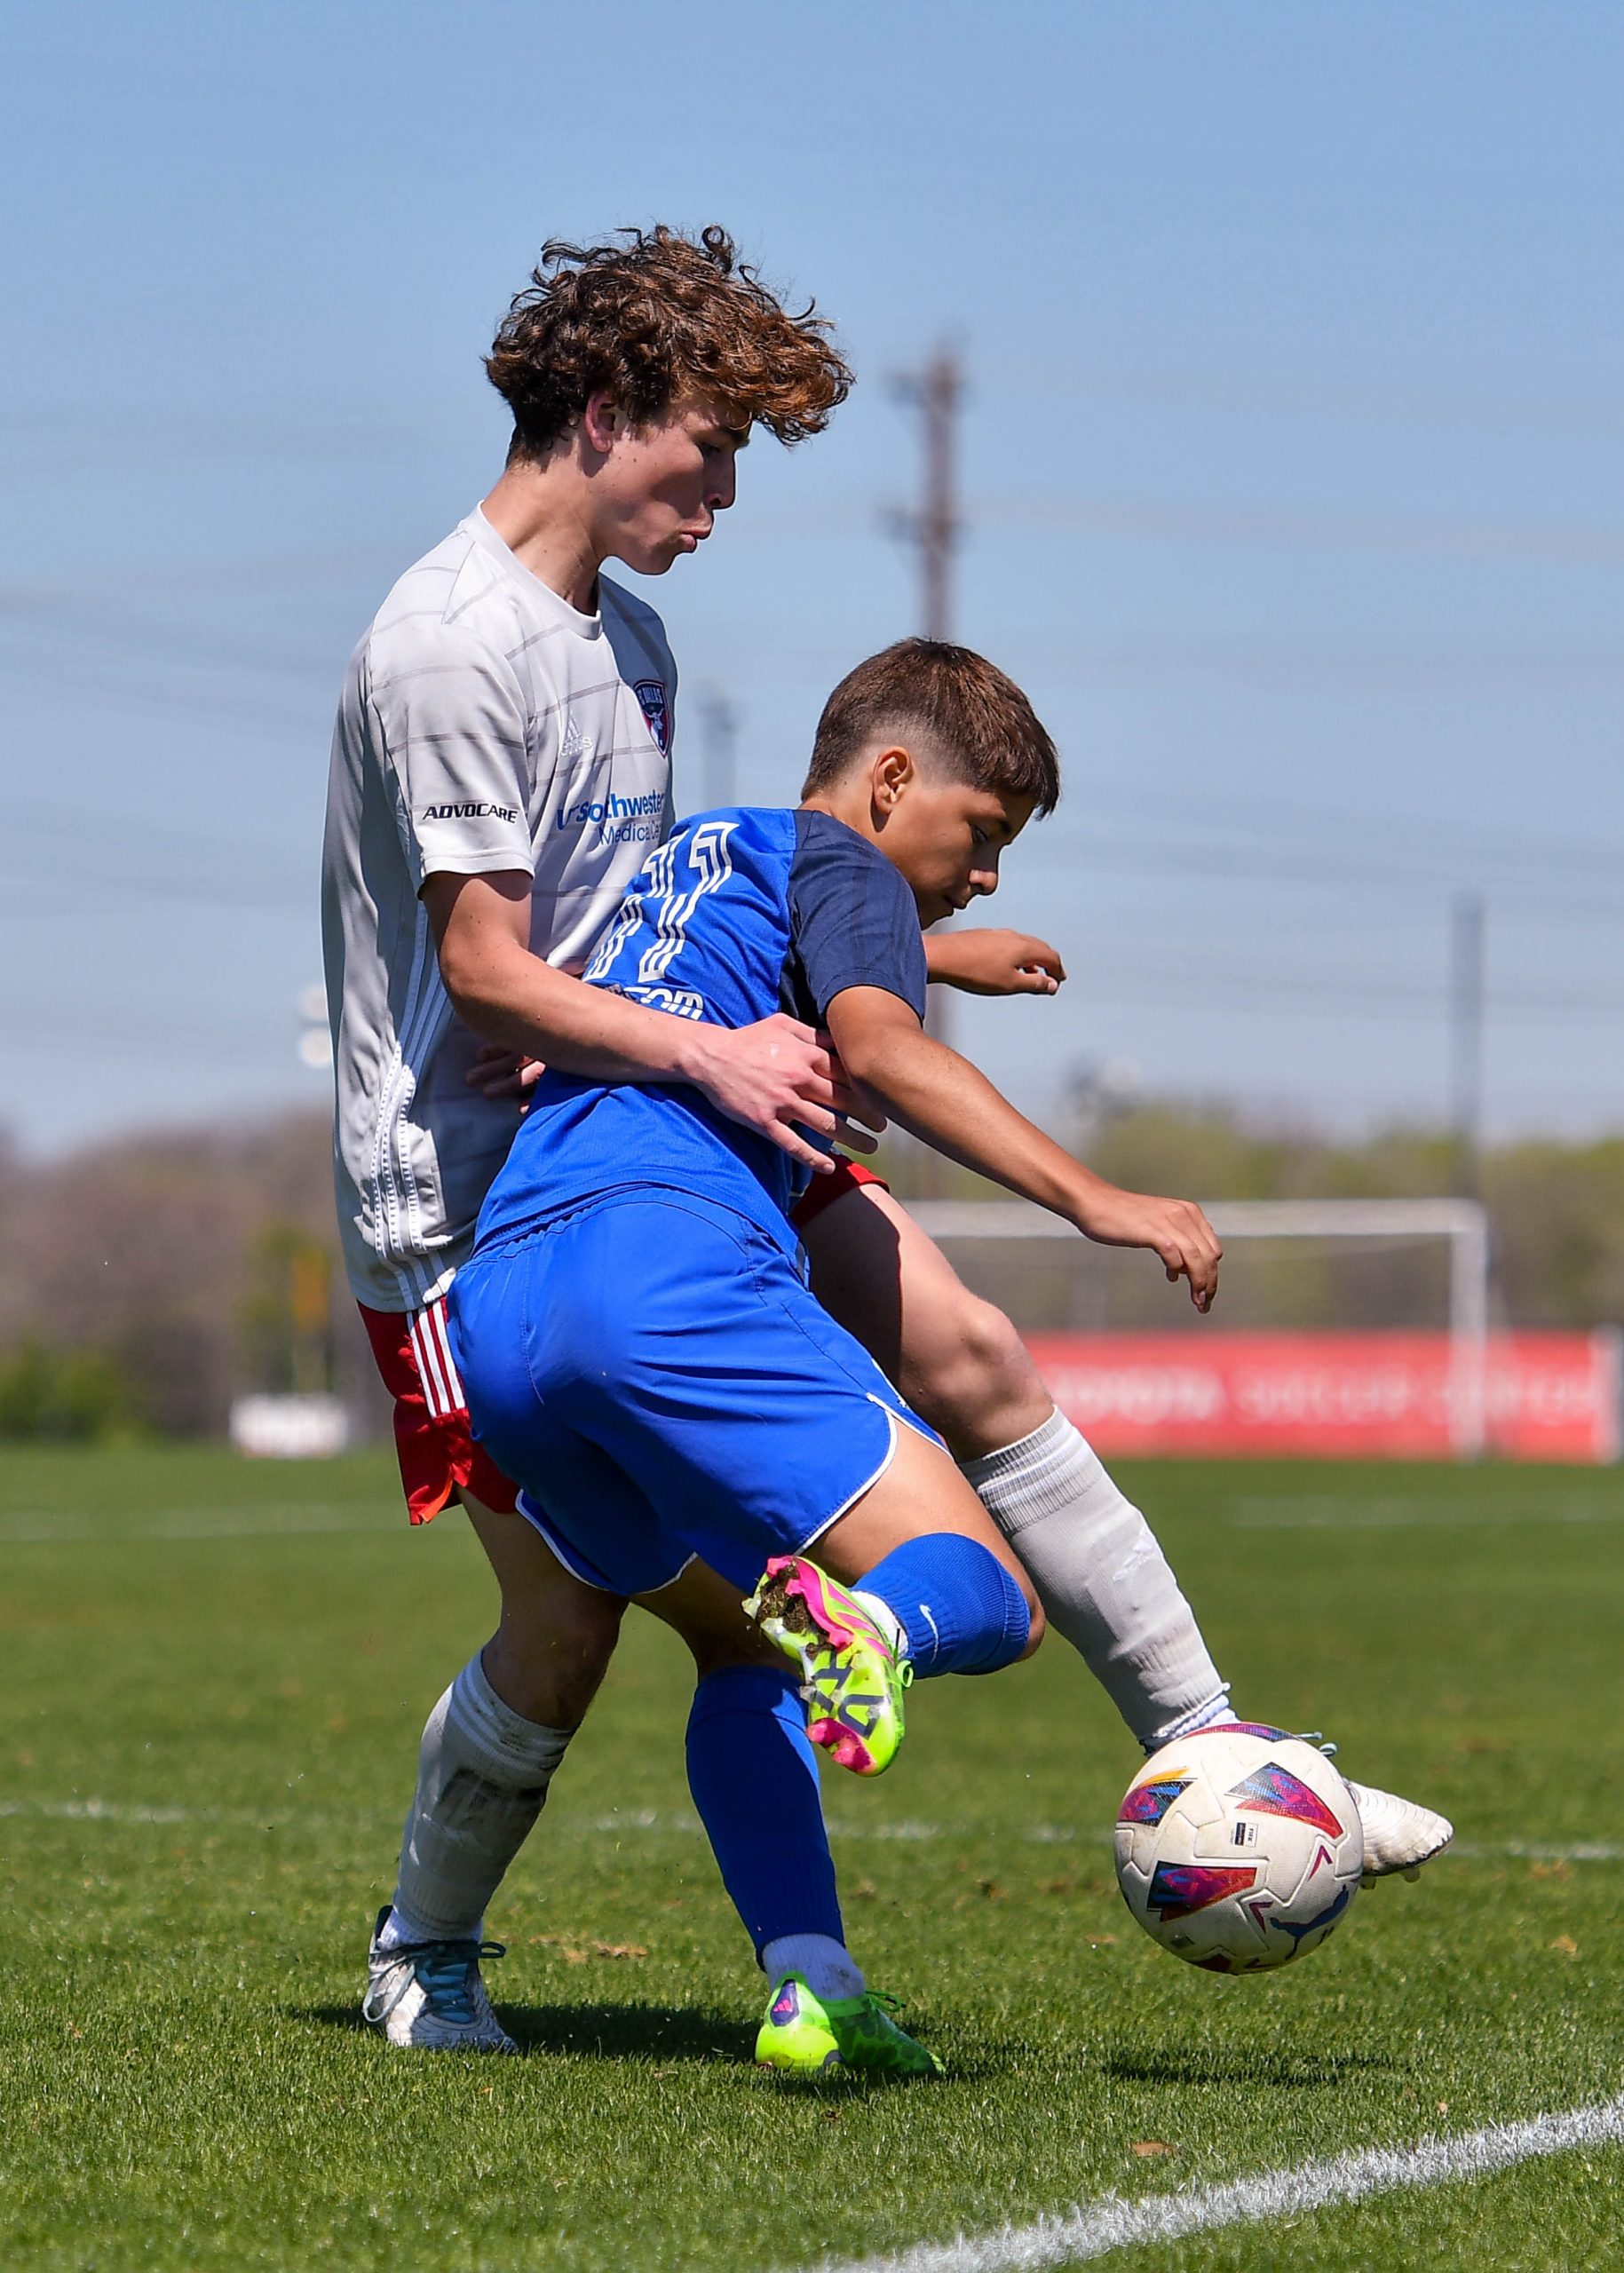 FC Dallas U17 ECNL White defender Jace Brewer pokes the ball loose in the Dallas Cup match against Doral SC at Toyota Soccer Center on March 26, 2024. (Daniel McCullough, 3rd Degree)